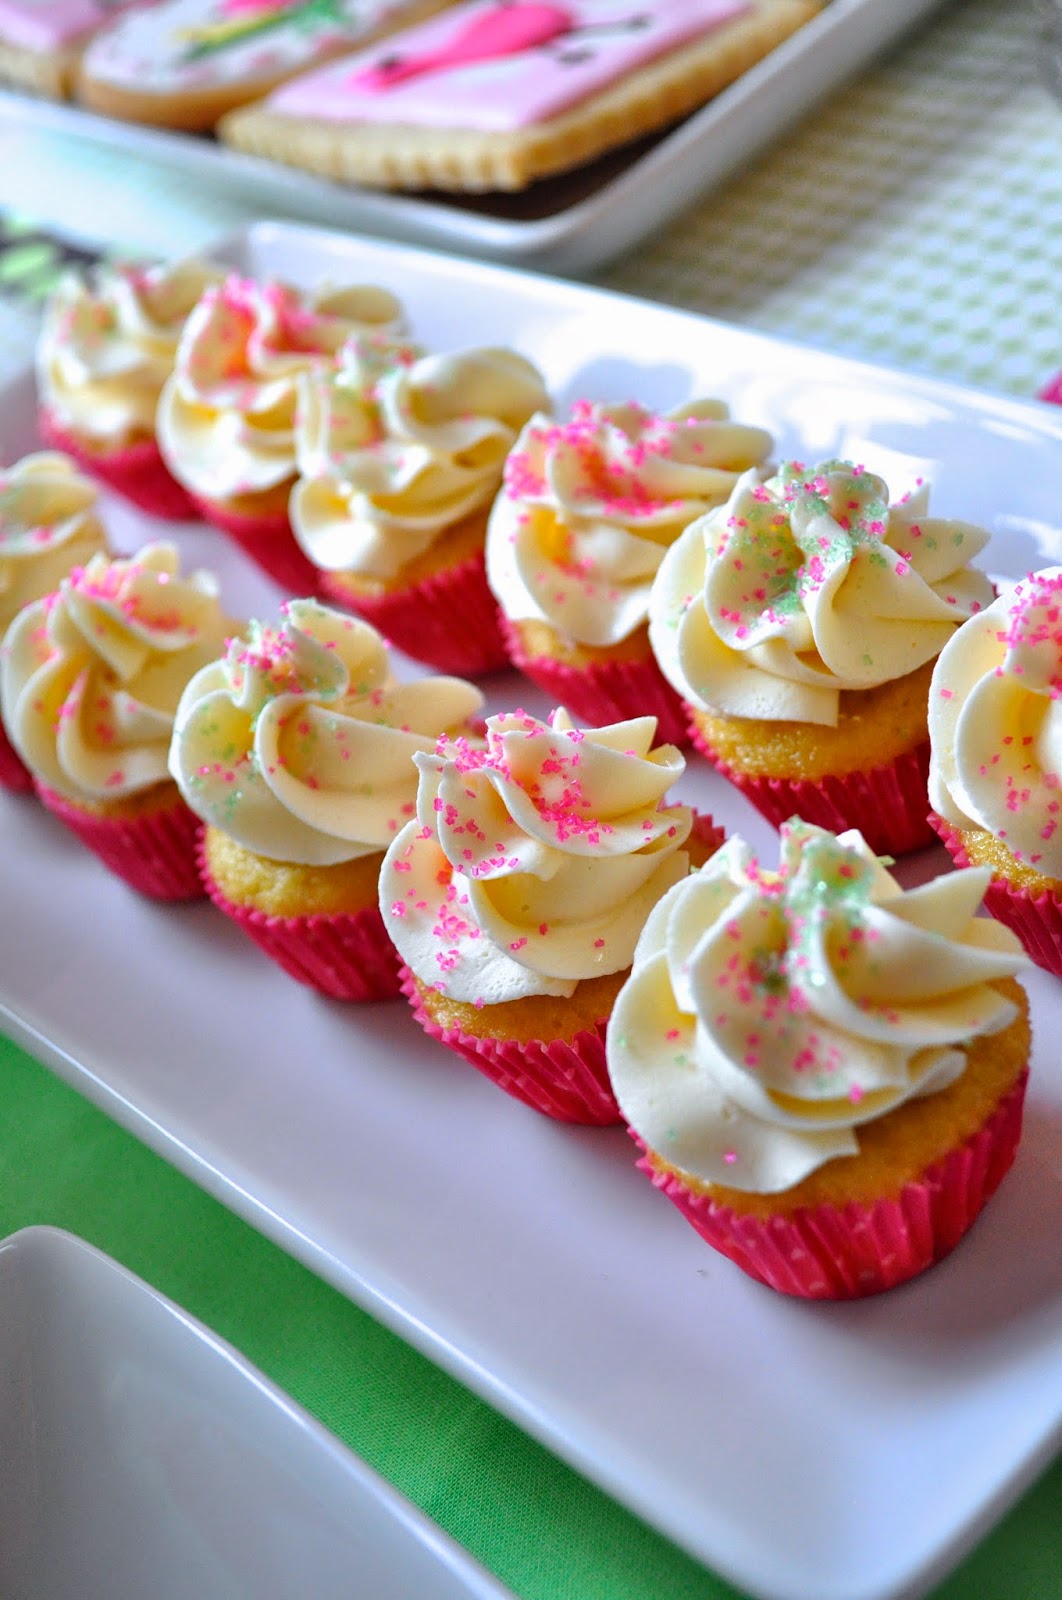 more mini cupcakes decorated with easy vanilla buttercream and pink sugar sprinkles